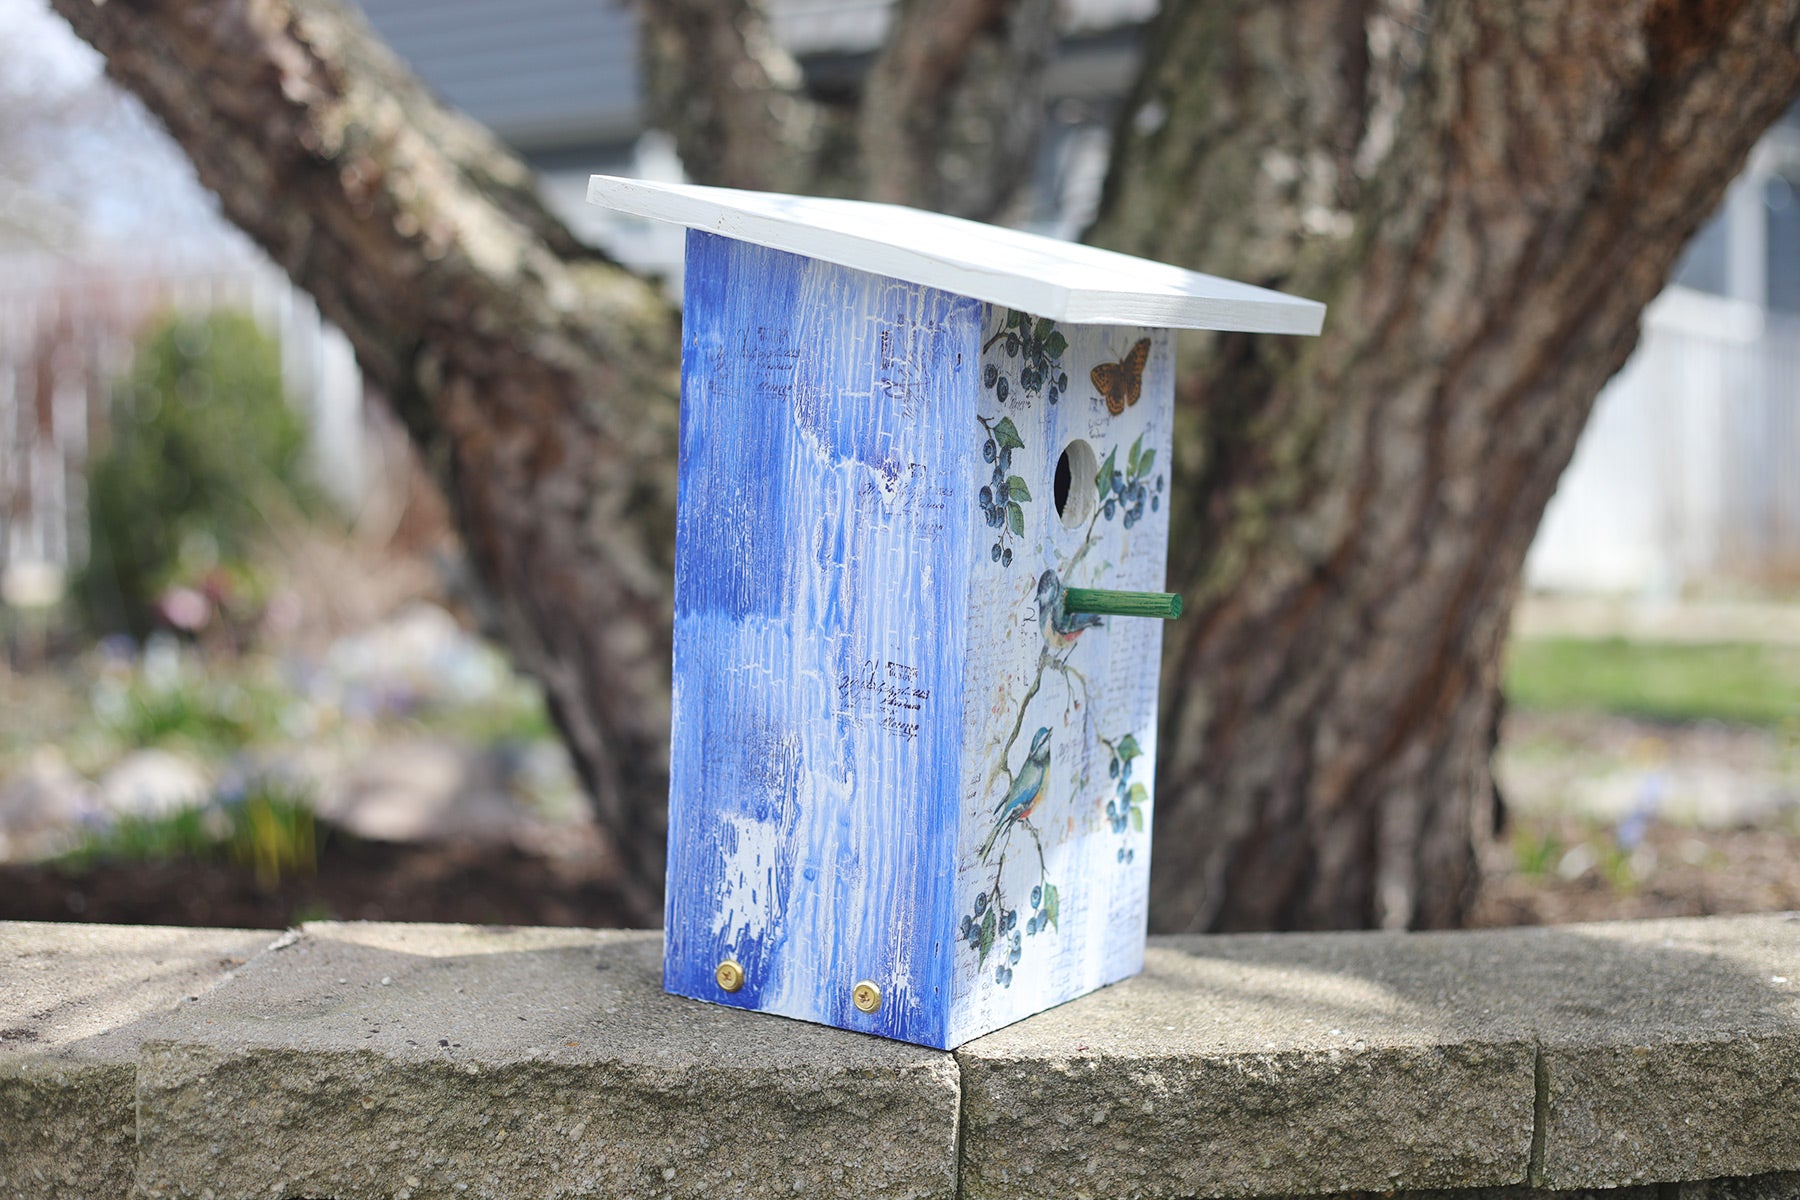 This adorable birdhouse is crackle painted with a blueberry and bird decoupage design and white roof. Constructed of weather and insect resistant cedar, wood glue and Polycrylic  sealer with easy bottom cleanout. Sure to make a great gift or addition to your back yard. 6 1/2"L x 5 1/4" W x 12 1/2" H.